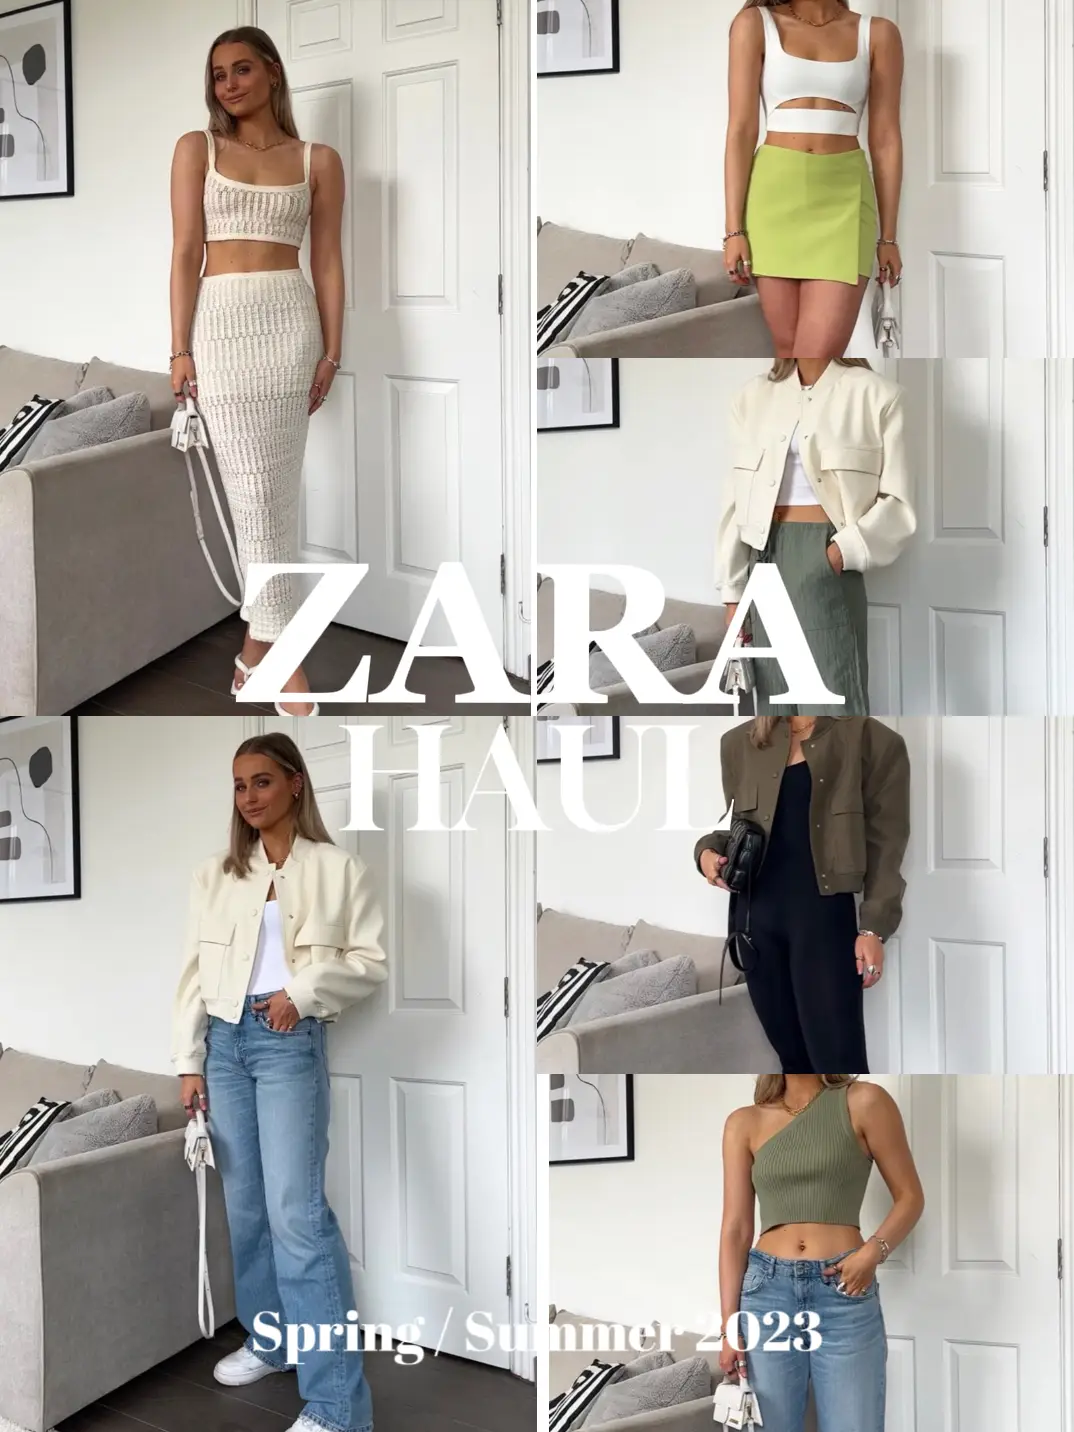 Zara outfit elegante y simple  Stylish outfits, Casual chic outfit, Casual  college outfits